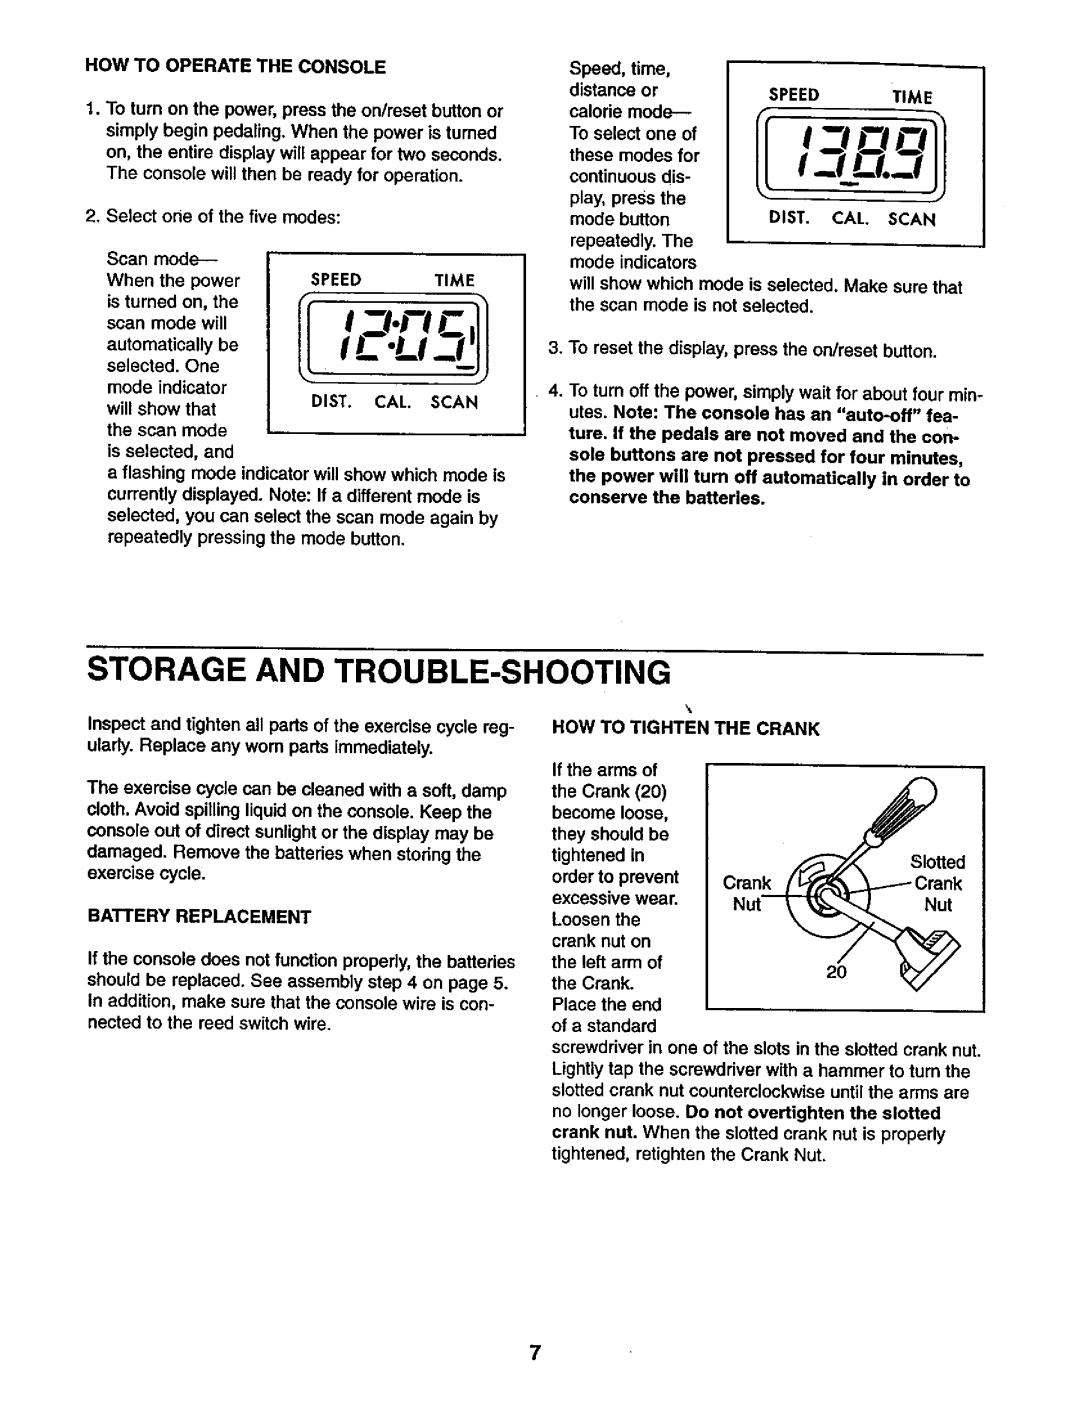 Sears 831.28822 user manual Storage And Trouble-Shooting 